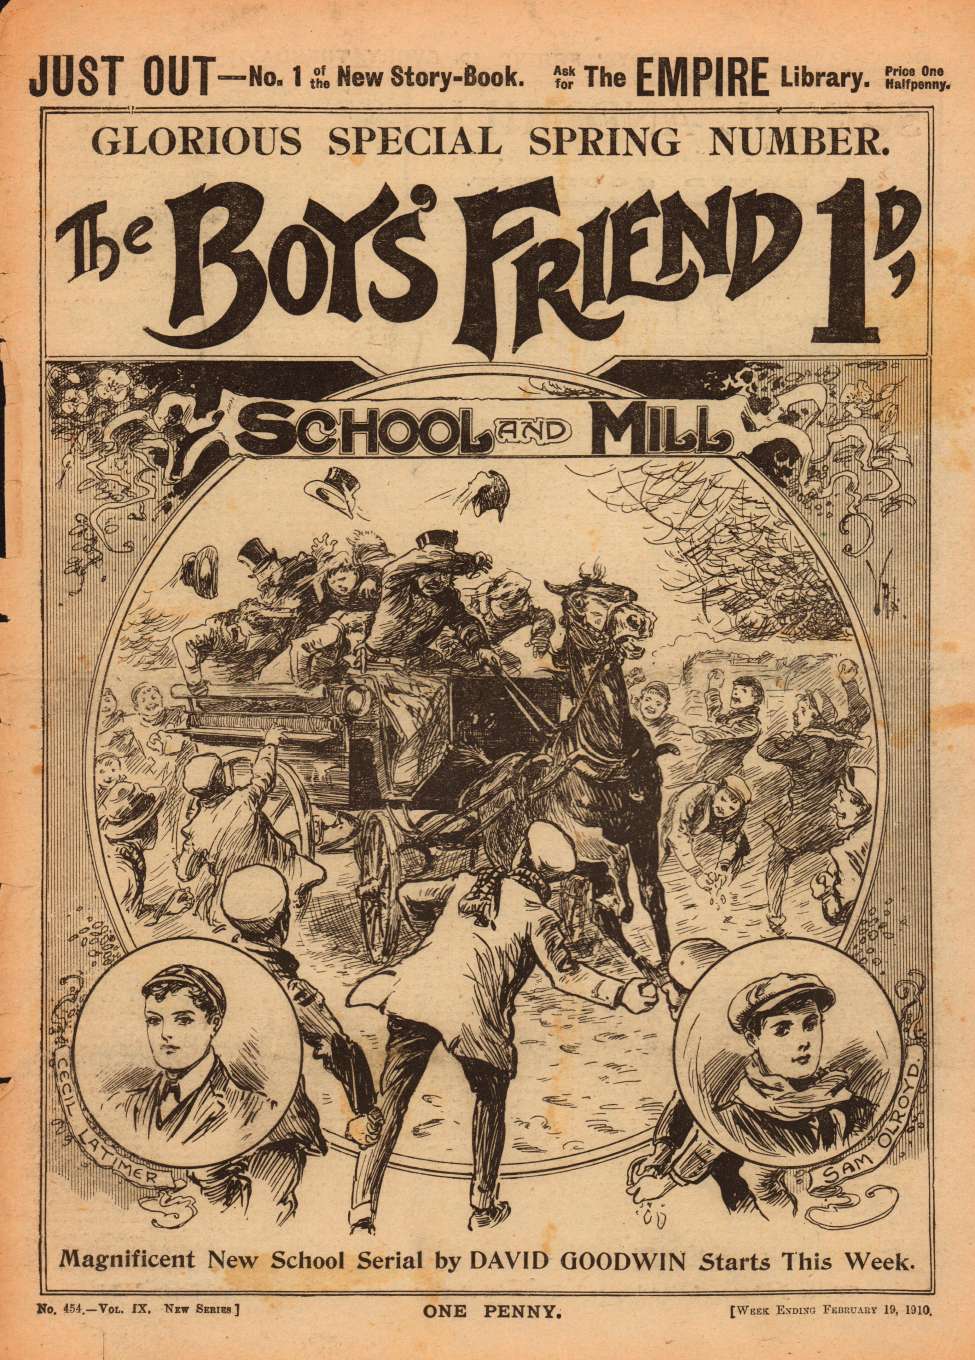 Book Cover For The Boys' Friend 454 - School and Mill